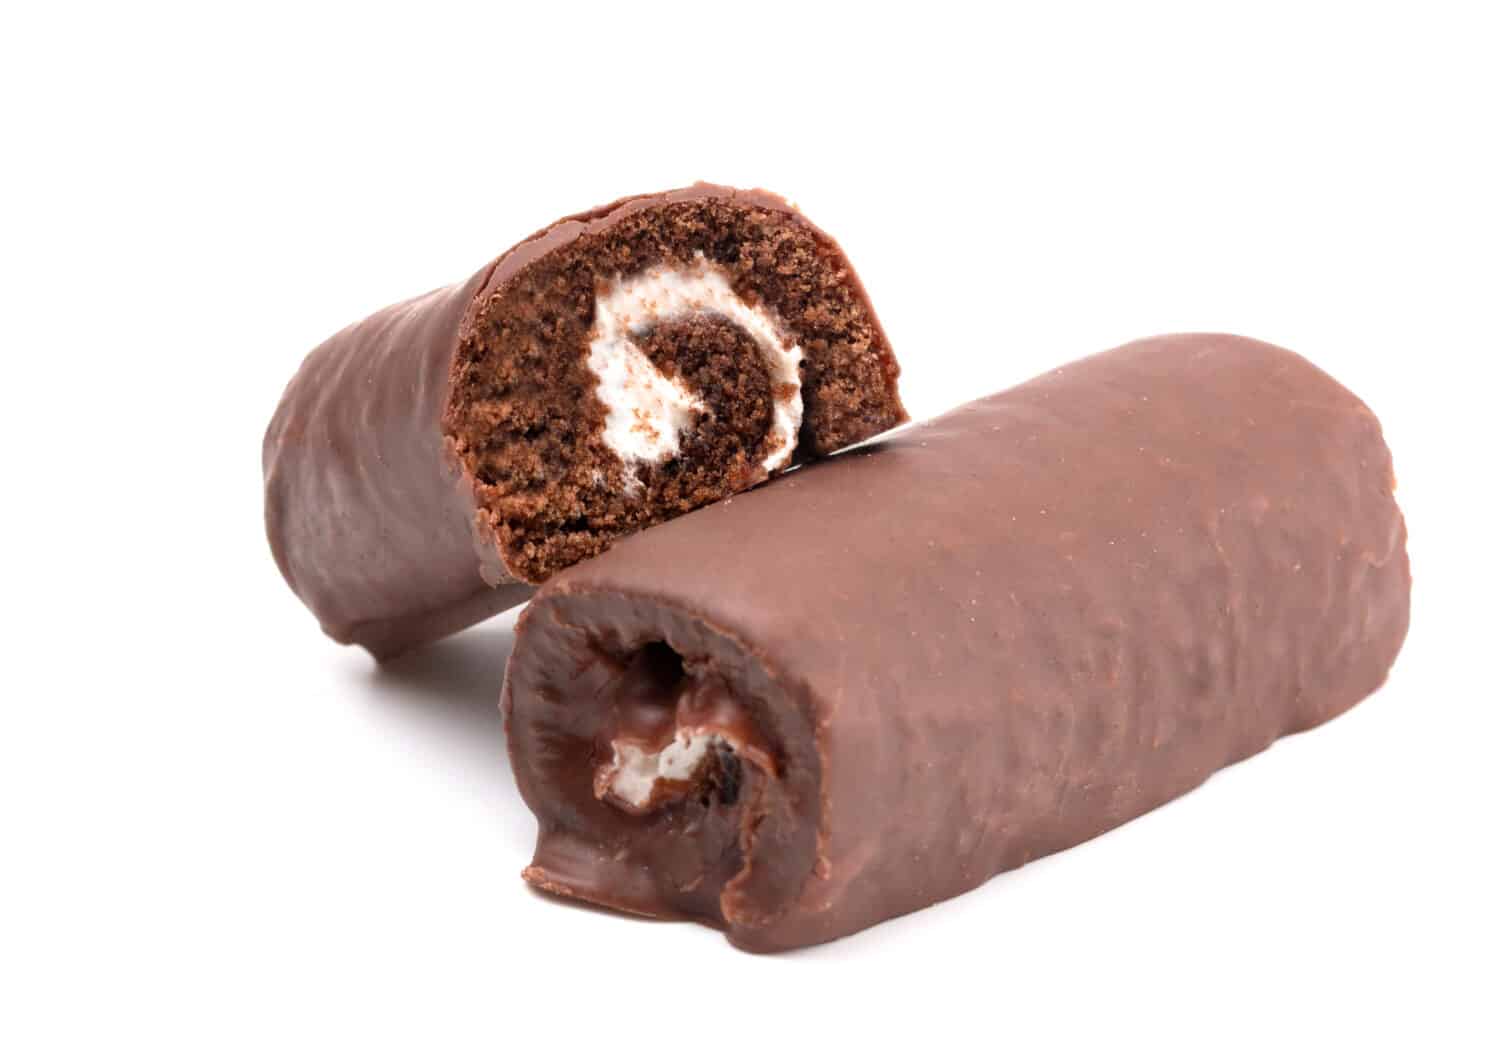 Chocolate Cake Roll on a White Background U.S. Foods That Are Banned